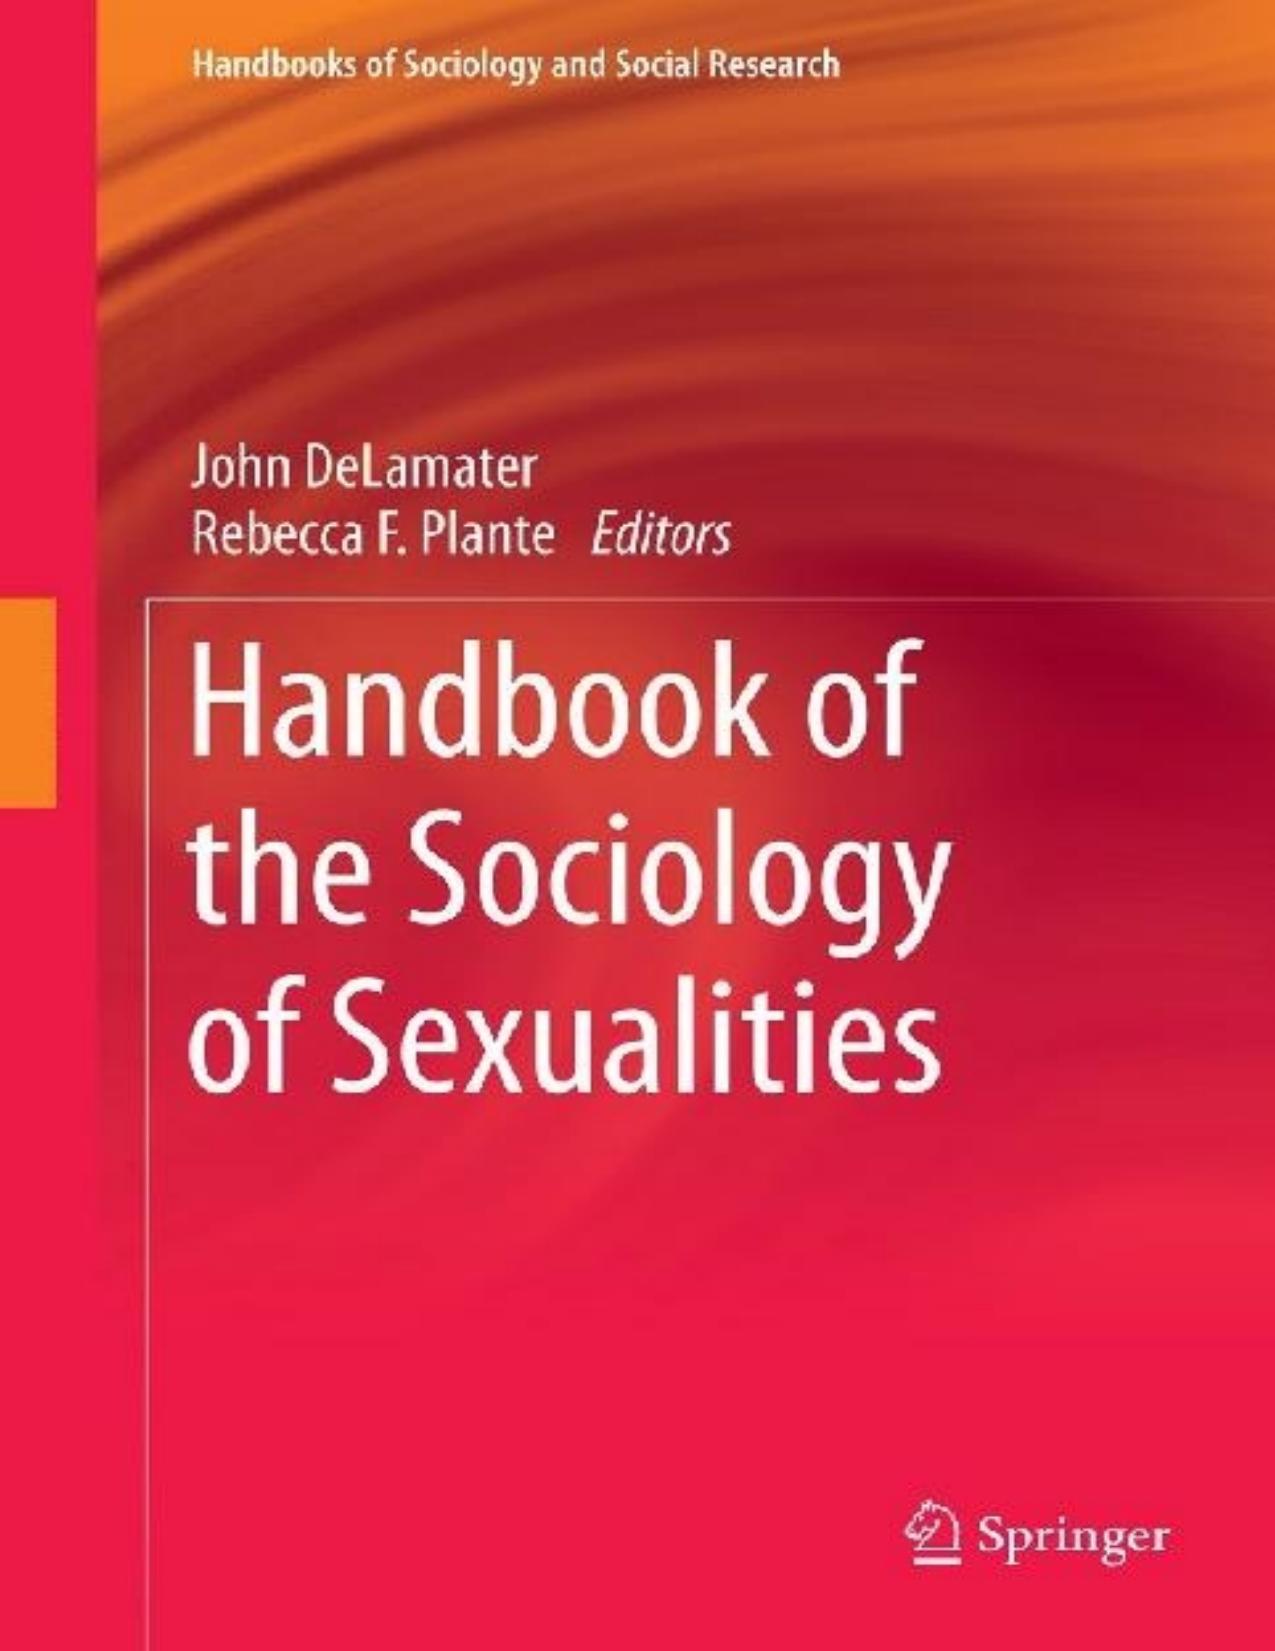 Handbook of the sociology of sexualities - PDFDrive.com